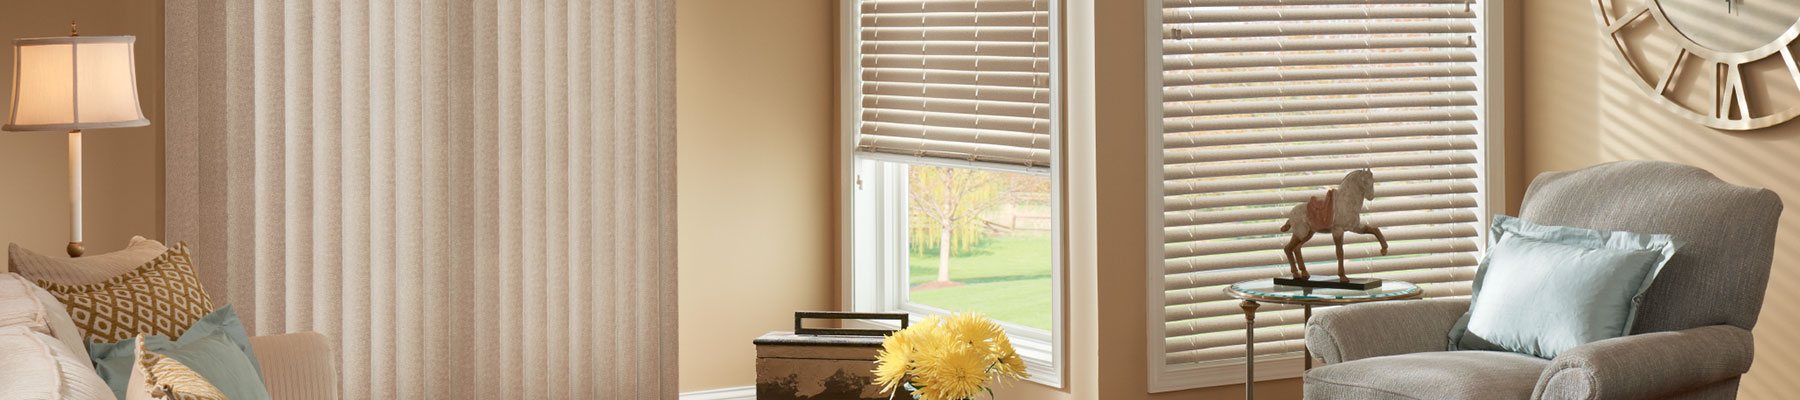  Lafayette Shutters, Blinds and More